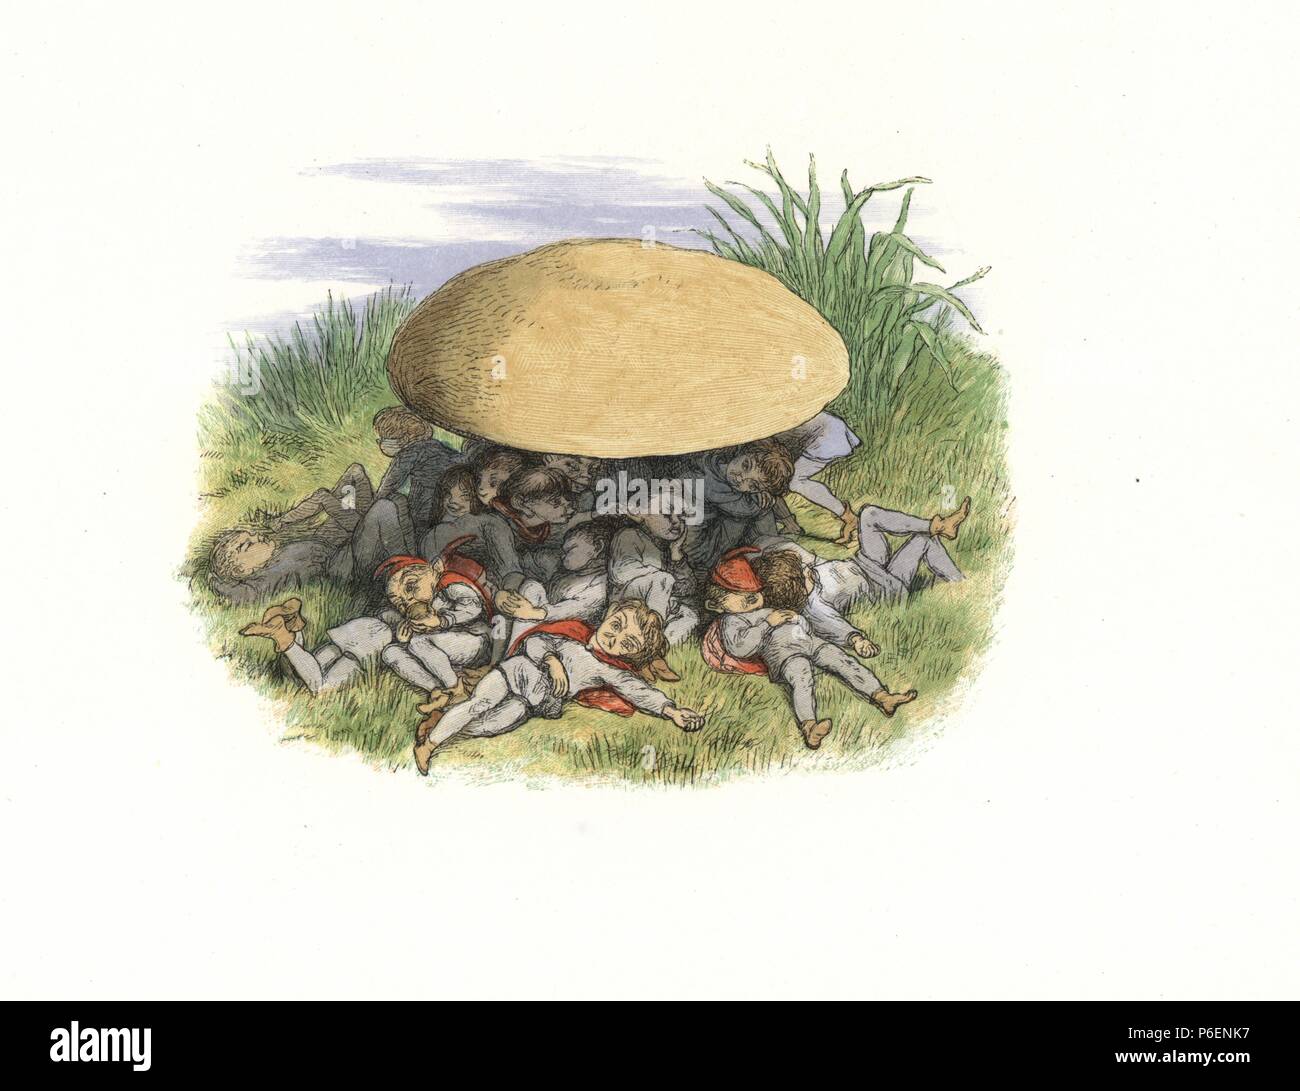 Elves sleeping under a toadstool. Handcoloured woodblock print by Edmund Evans after an illustration by Richard Doyle from In Fairyland, a series of Pictures from the Elf World, Longman, London, 1870. Stock Photo